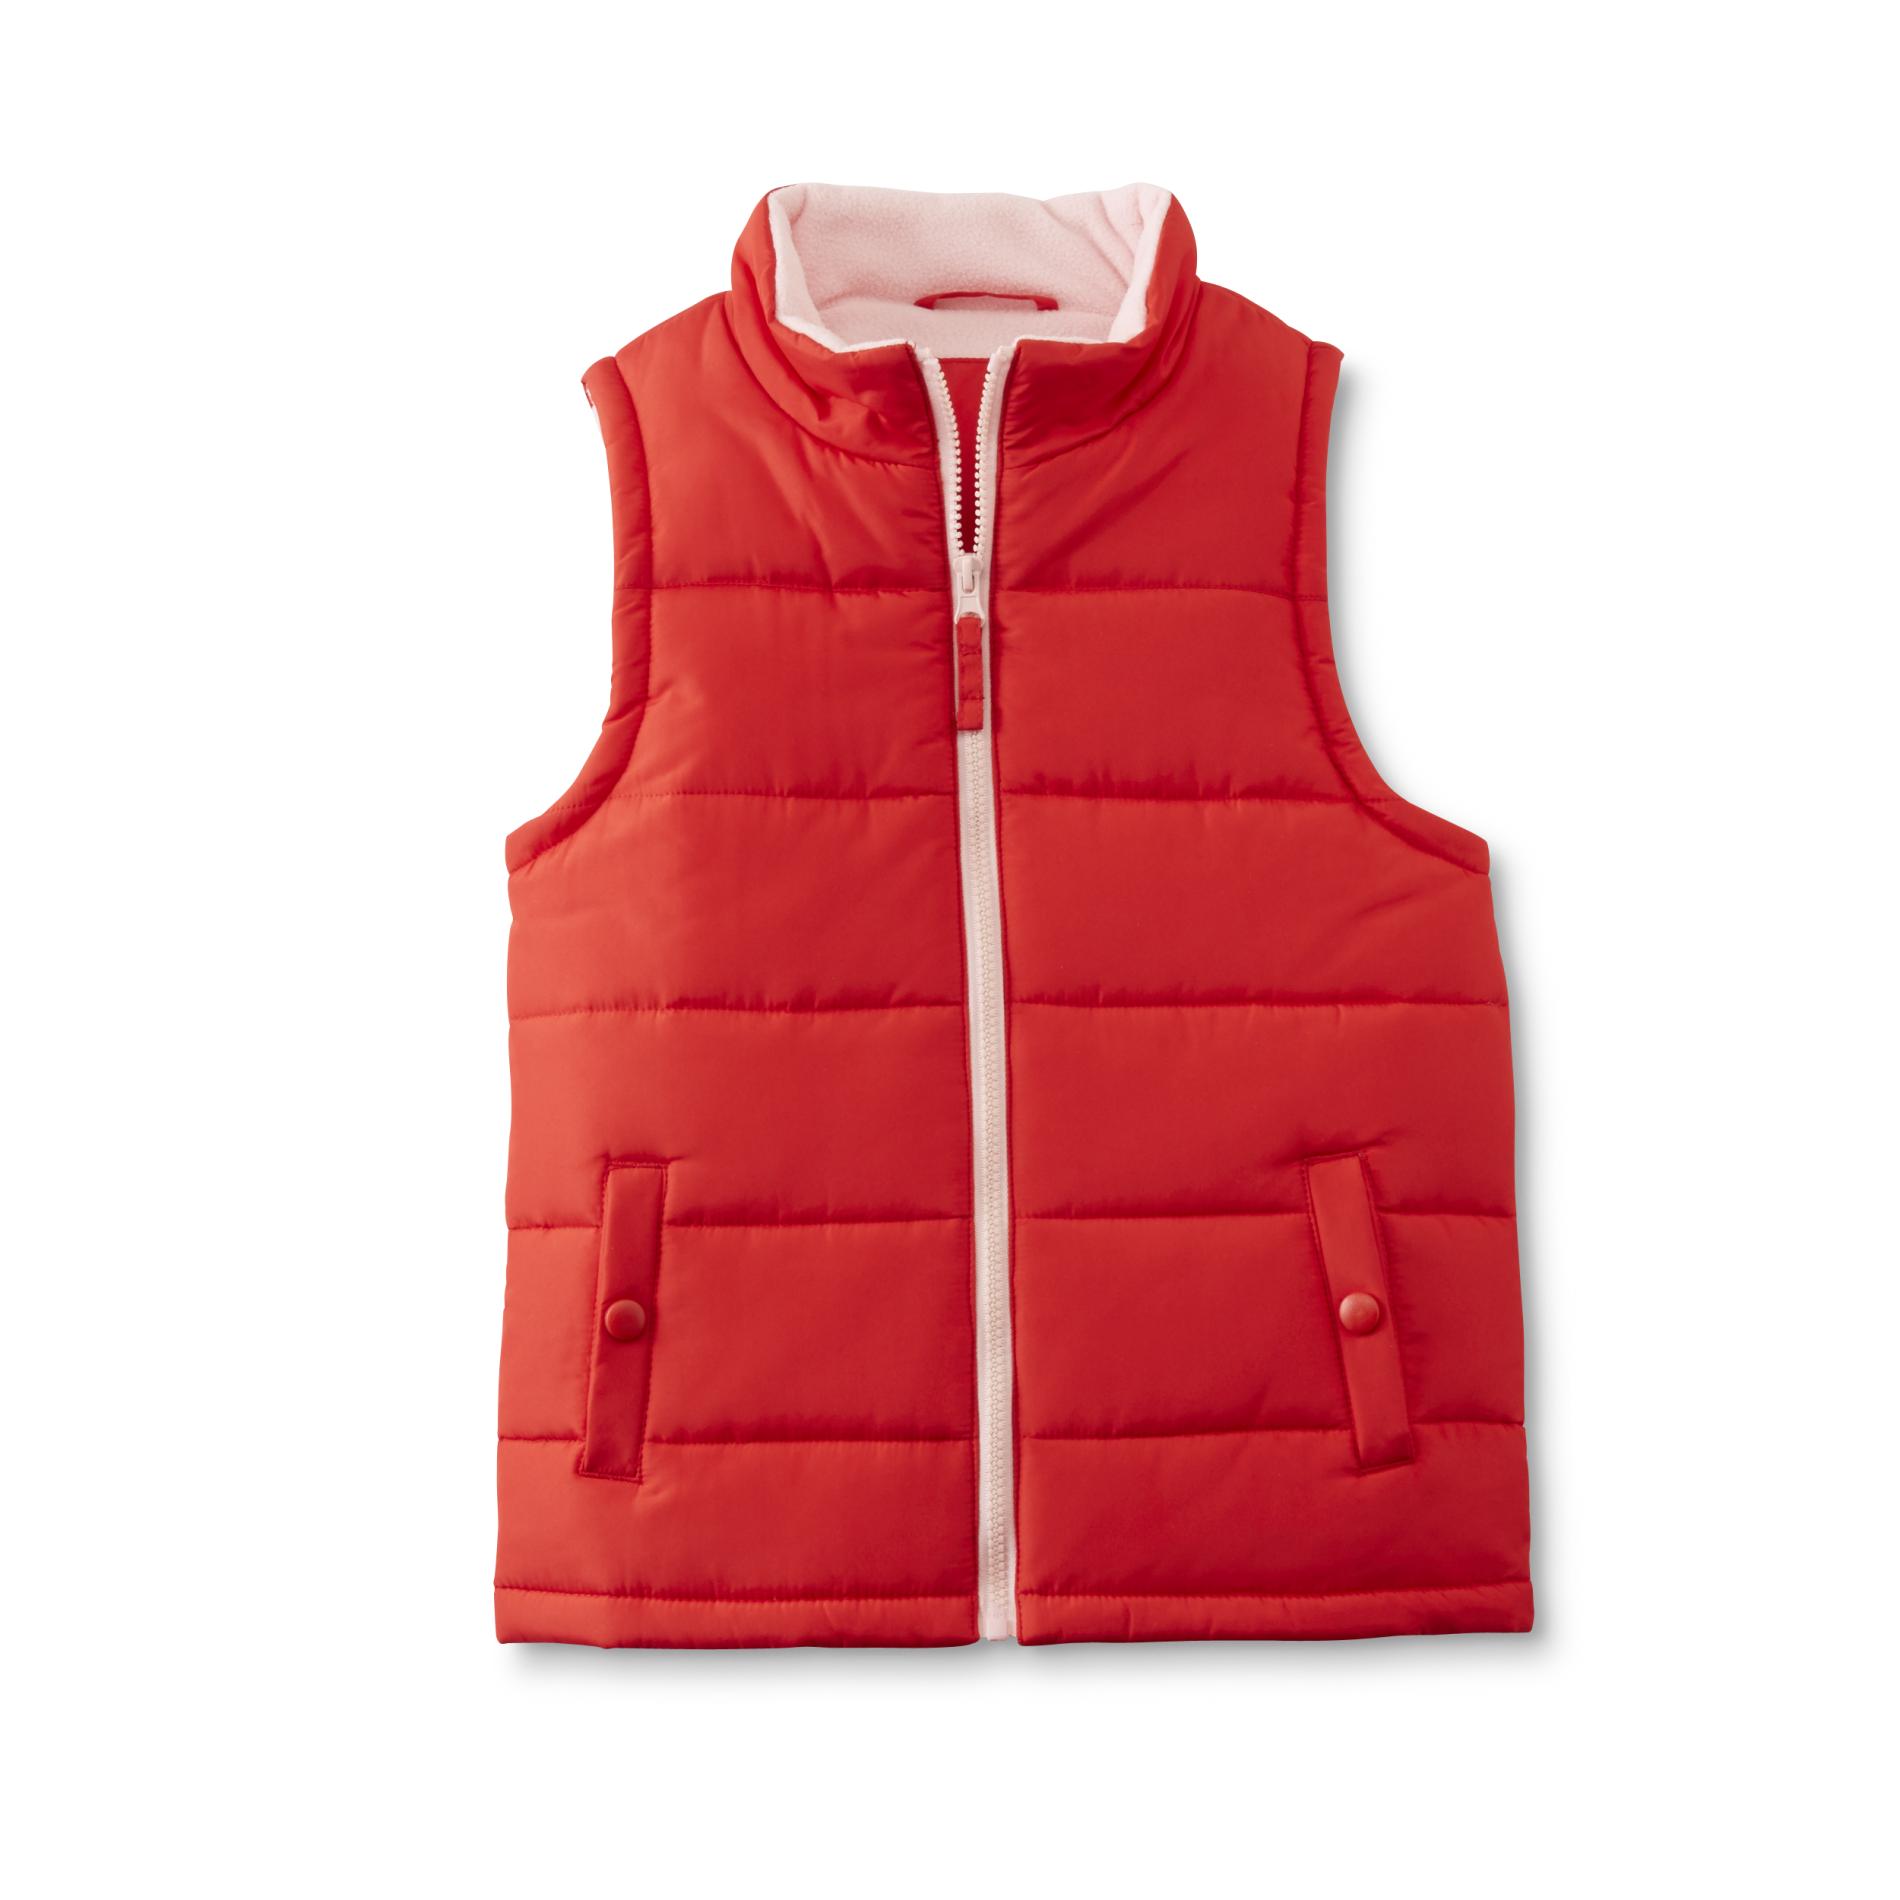 Simply Styled Girl's Puffer Vest